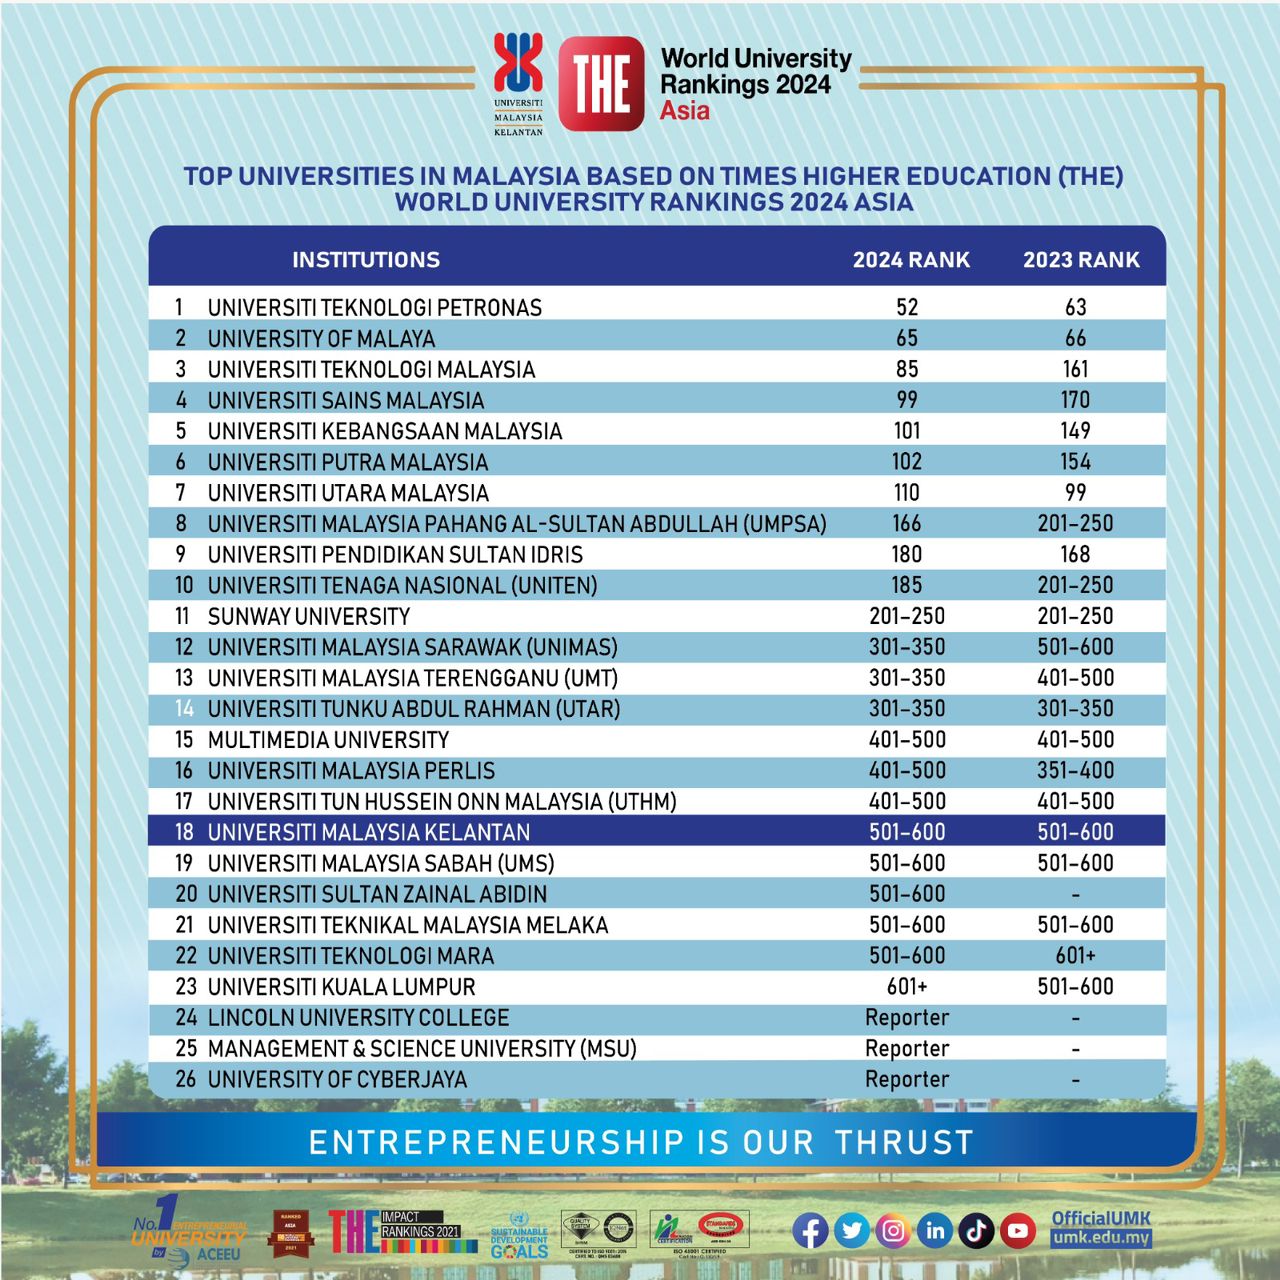 Top Universities In Malaysia Based On Times Higher Education (THE) World University Rankings 2024 Asia